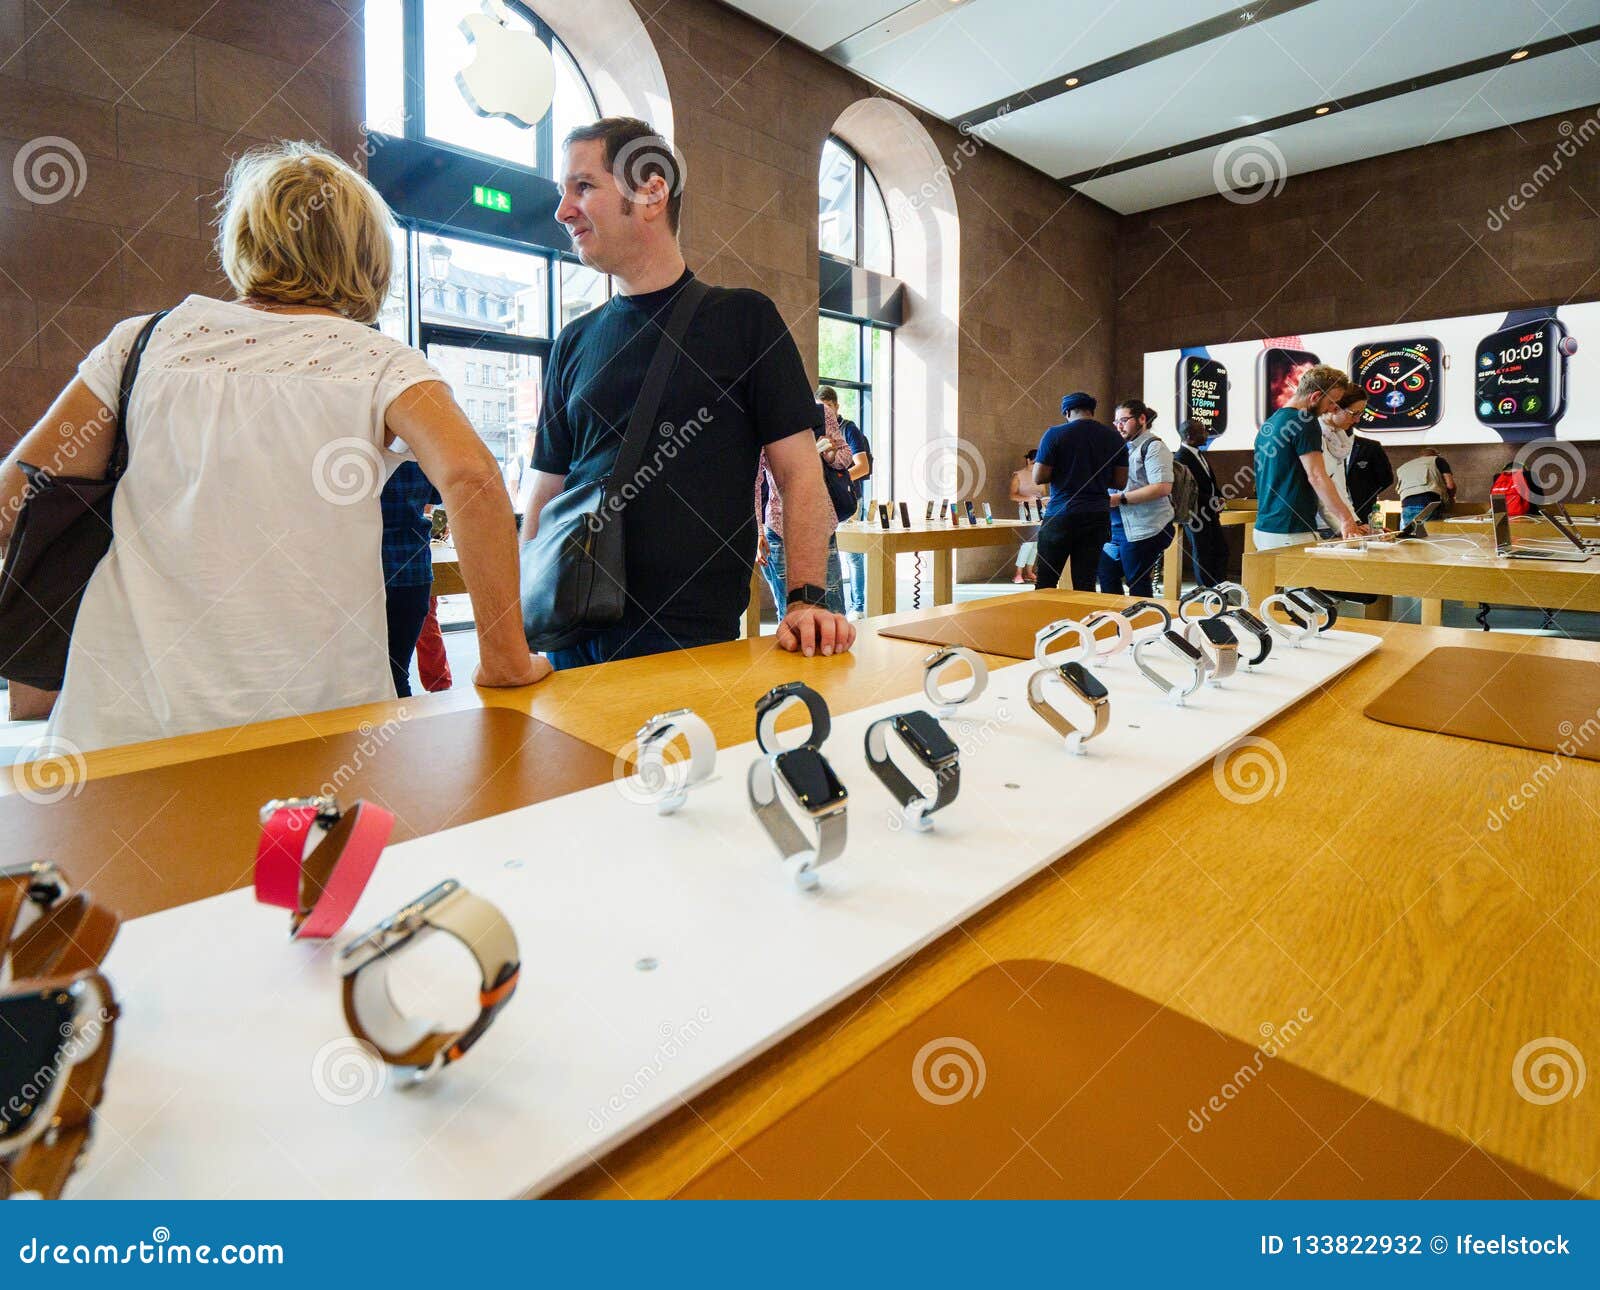 Couple Shopping for Apple Watch Series 4 in Apple Store Editorial Photography - Image display, internet: 133822932